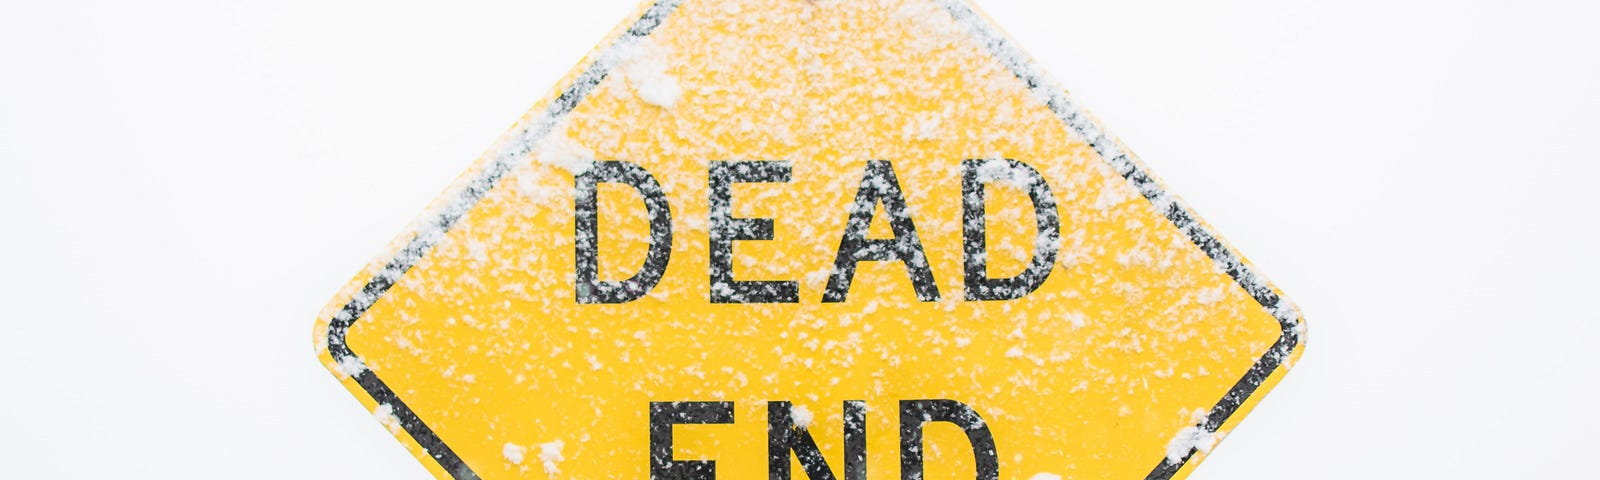 Yellow “DEAD END” road sign with a dusting of snow.